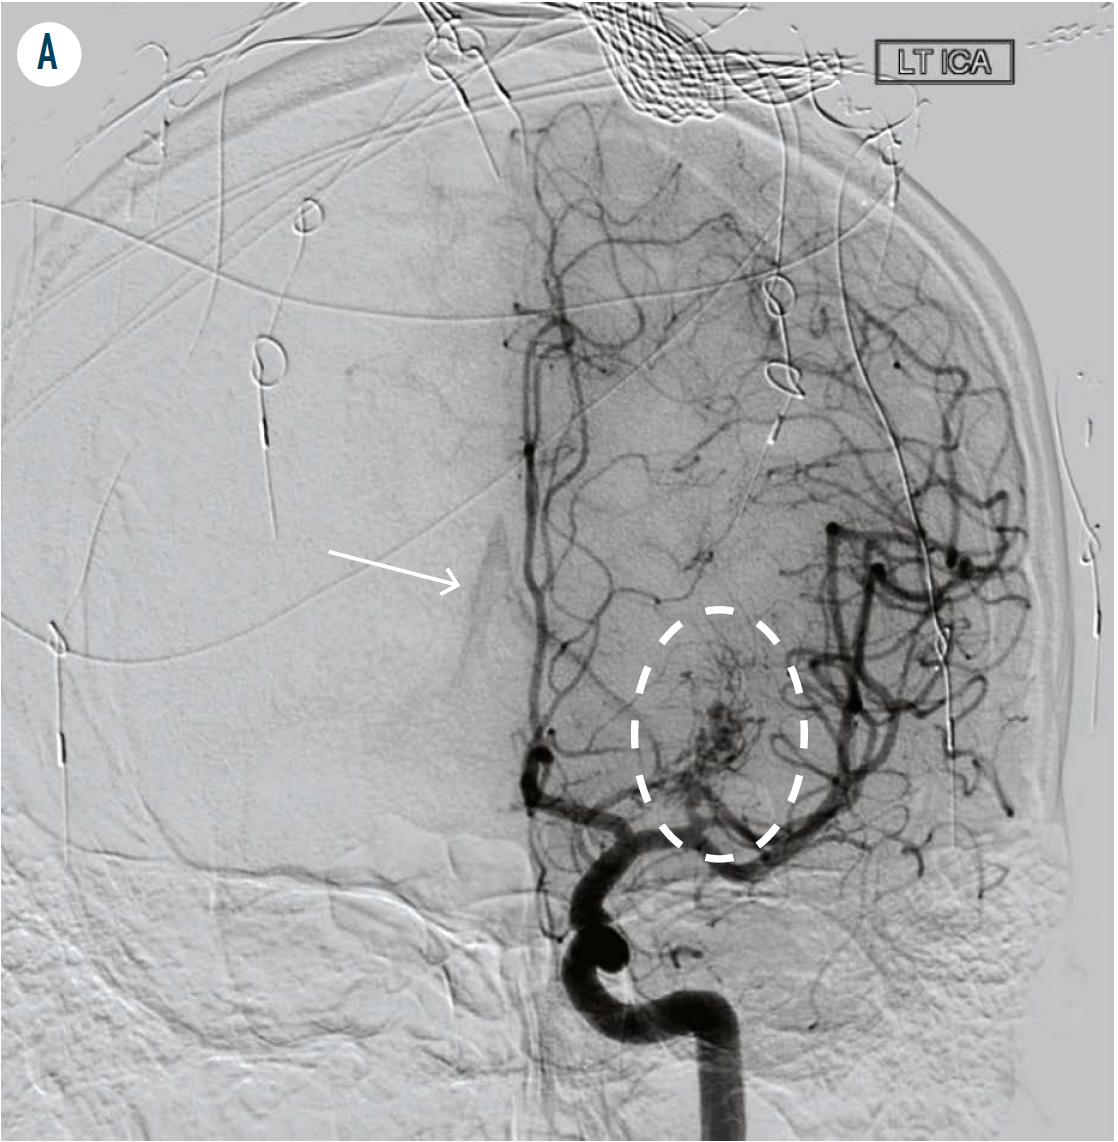 FIGURE 4A. Initial cerebral catheter angiogram shows a small left thalamic AVM (dashed oval). Notice the early draining vein (white arrow) in the center of the image–a characteristic AVM feature–an early drainage from the AVM nidus, which appears to cross midline. (Figure author provided)